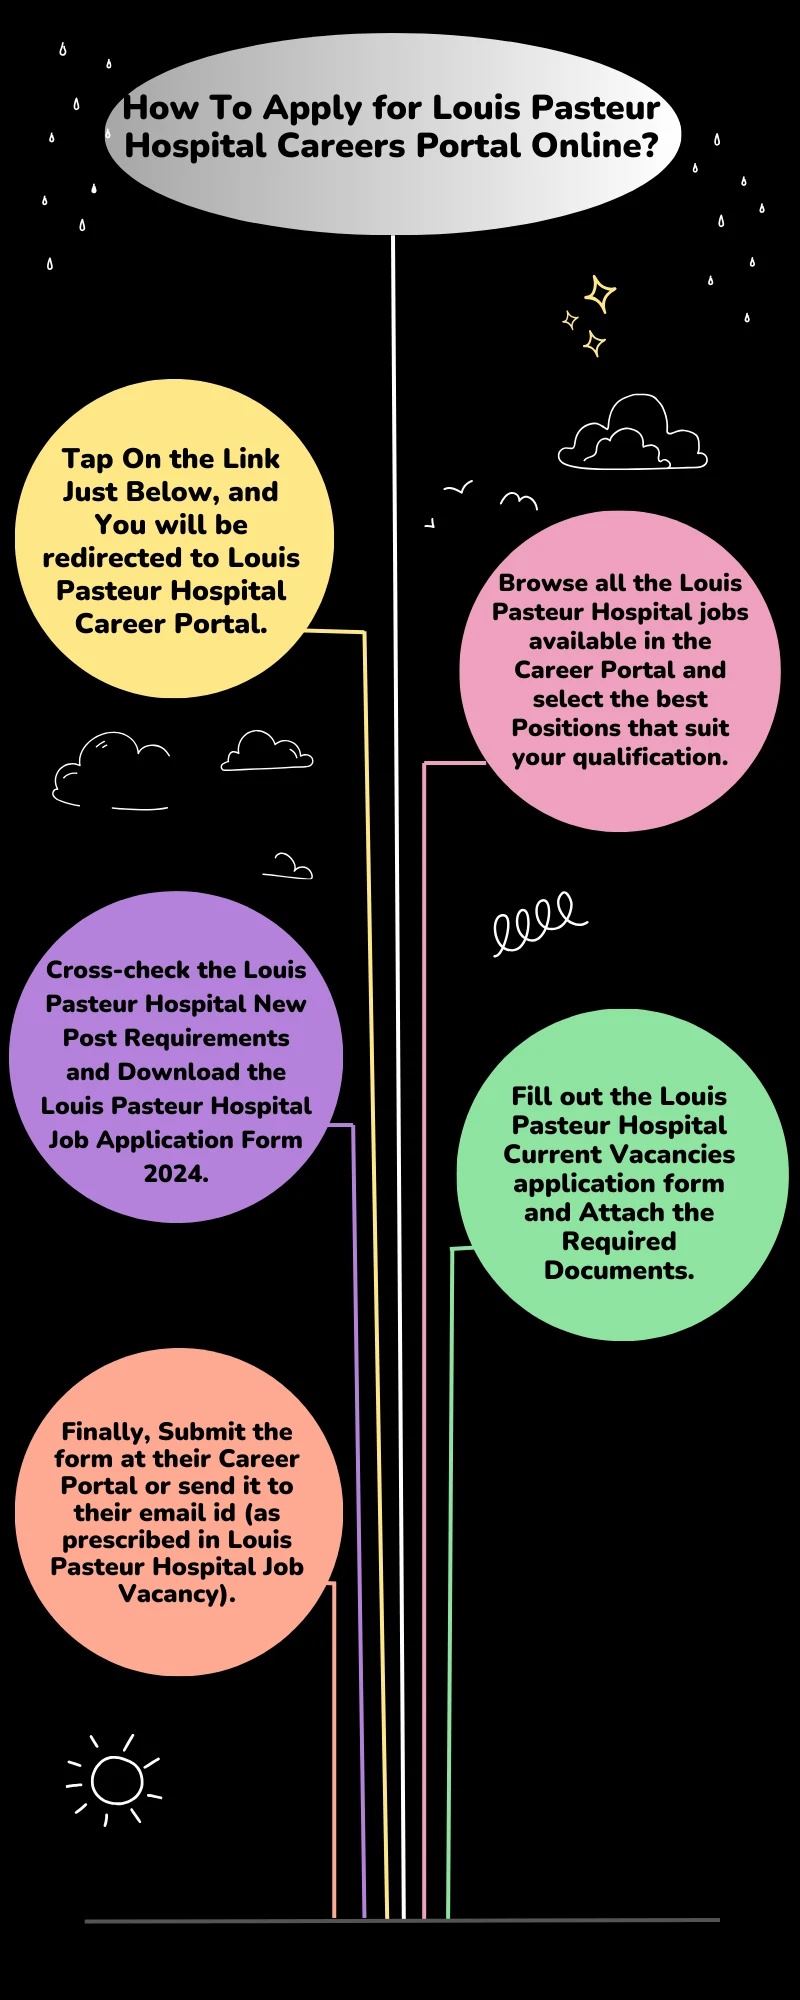 How To Apply for Louis Pasteur Hospital Careers Portal Online?